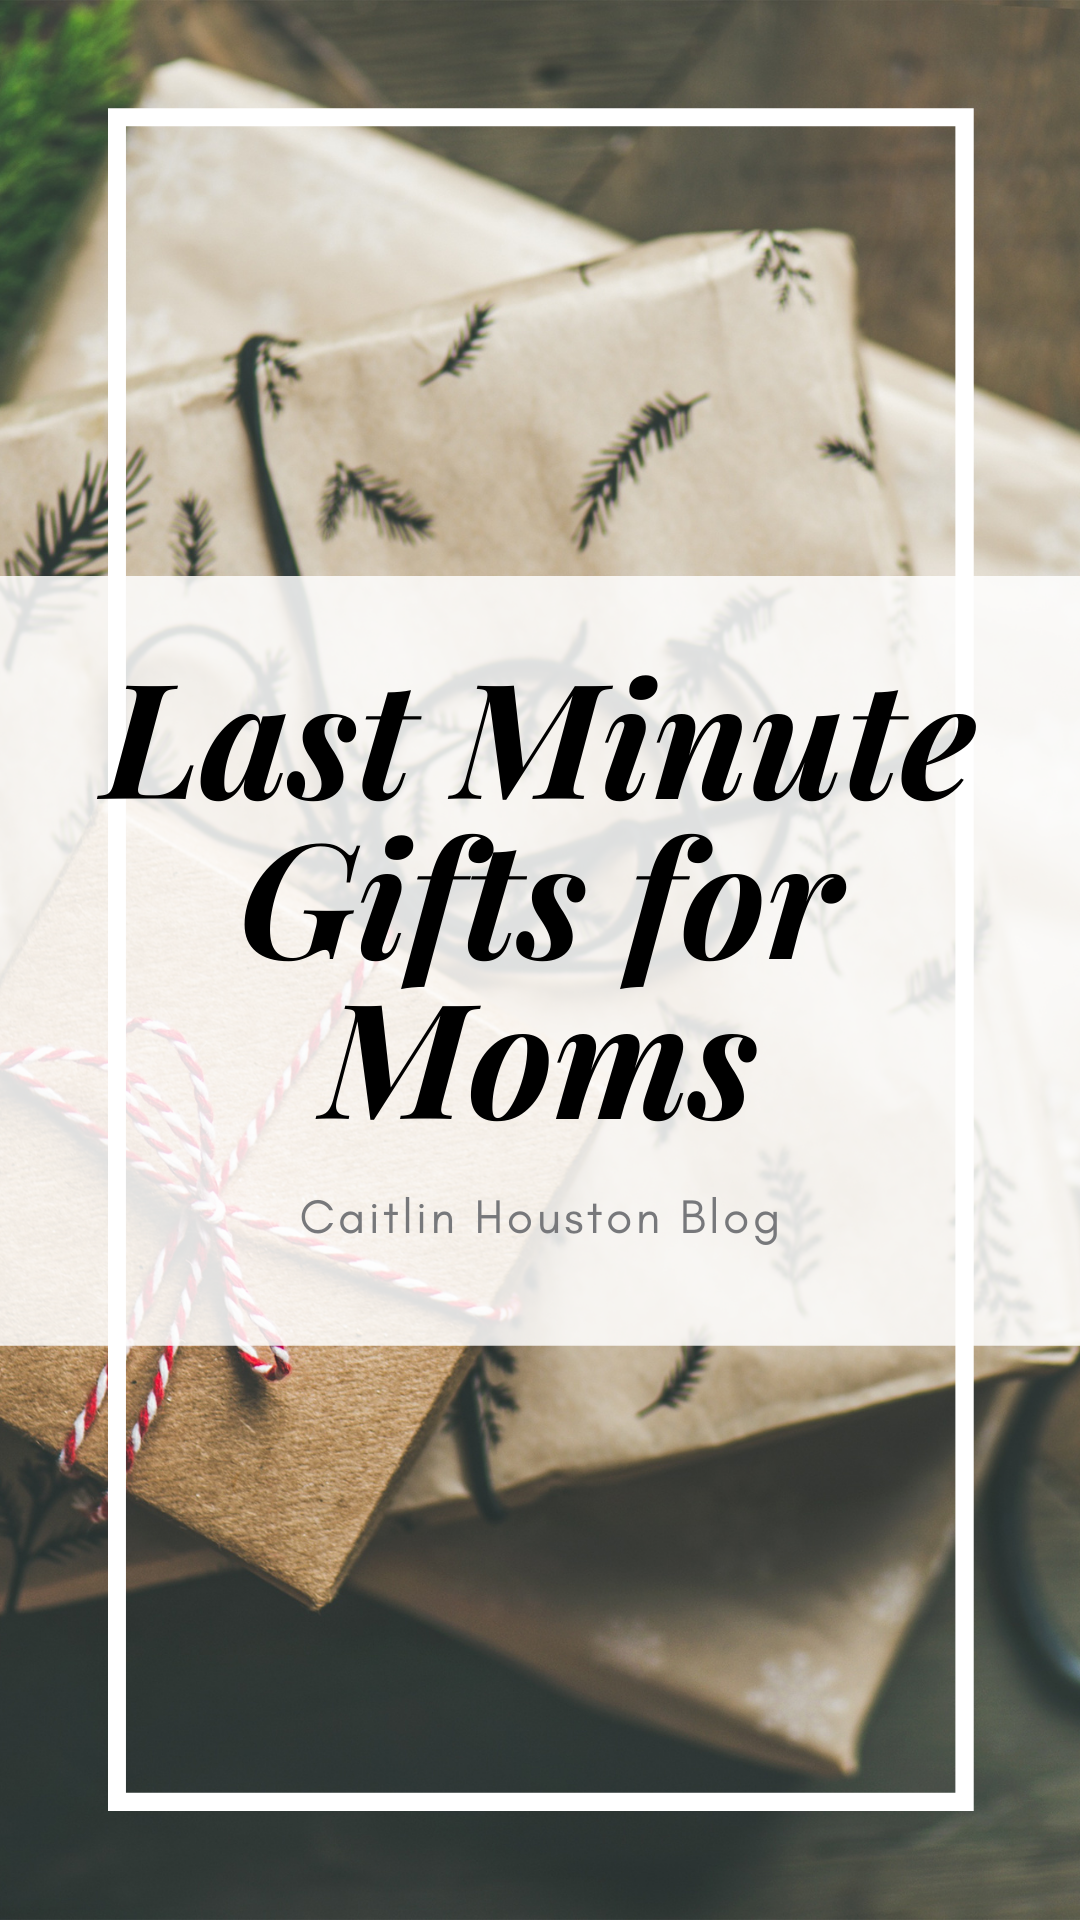 Last Minute Gift Ideas for a Mom